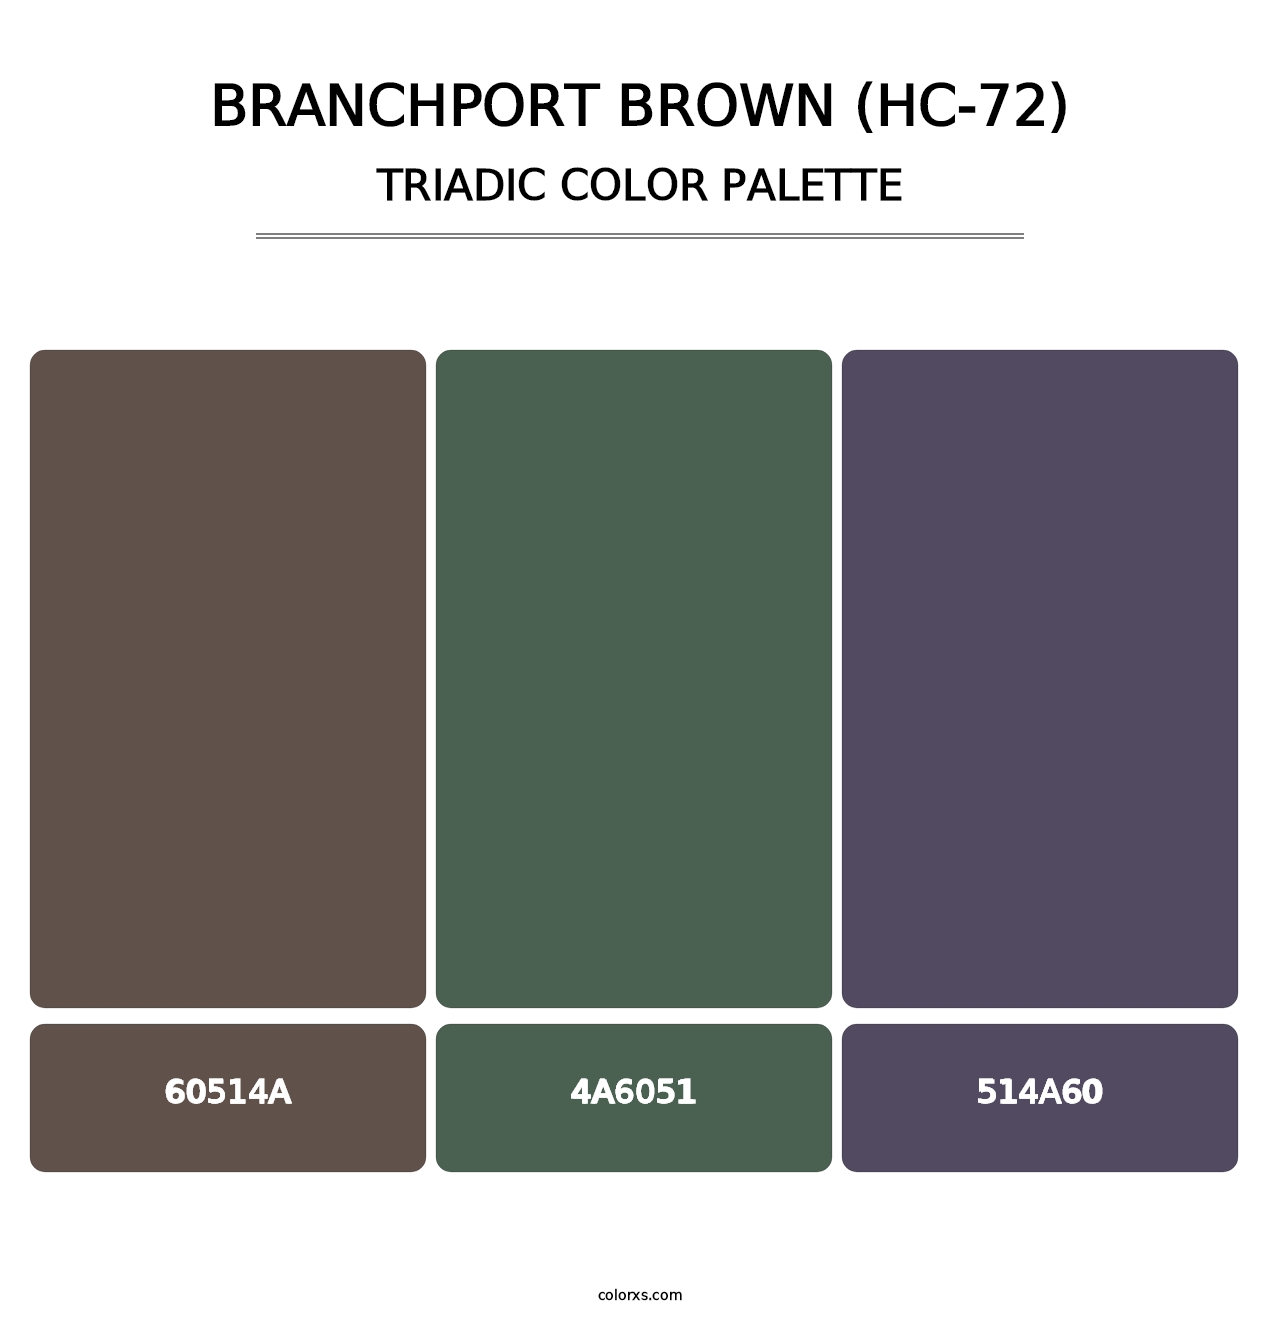 Branchport Brown (HC-72) - Triadic Color Palette